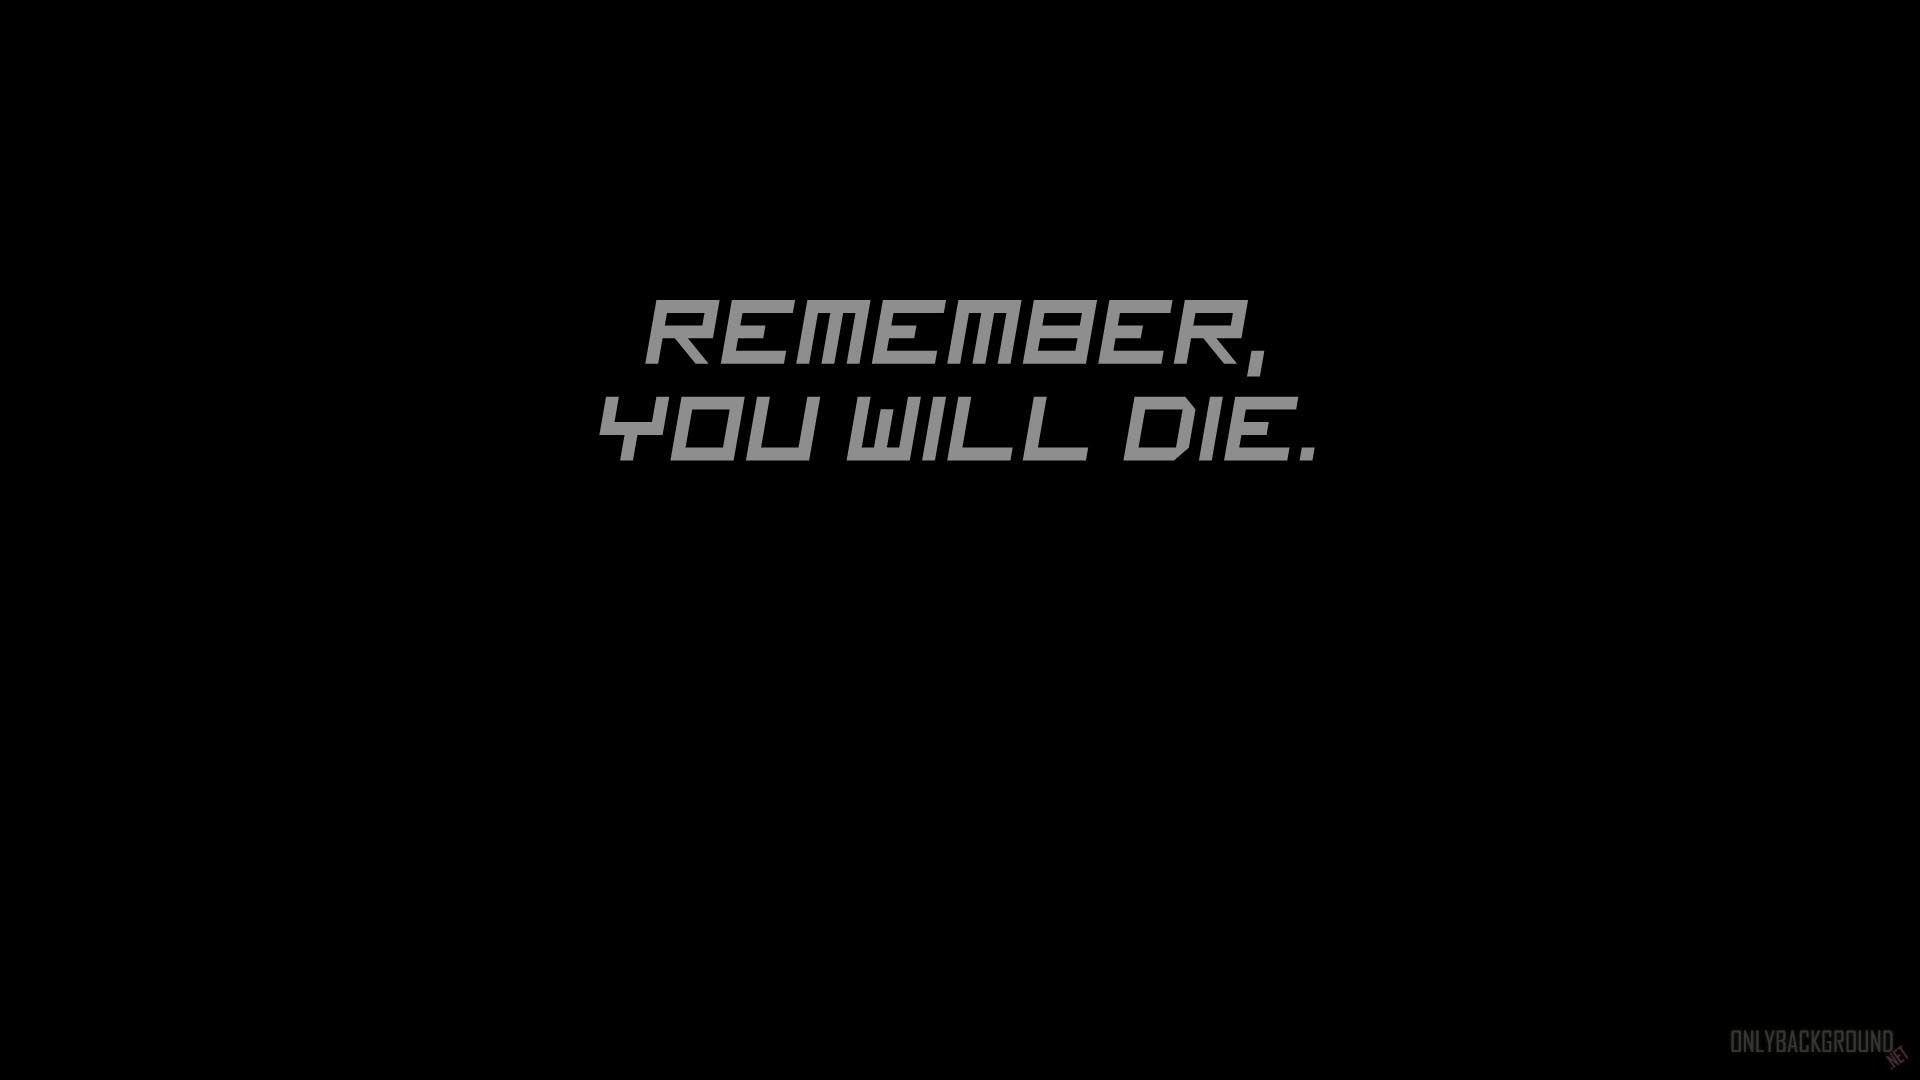 Remember, You will die wallpaper is meaningful for person